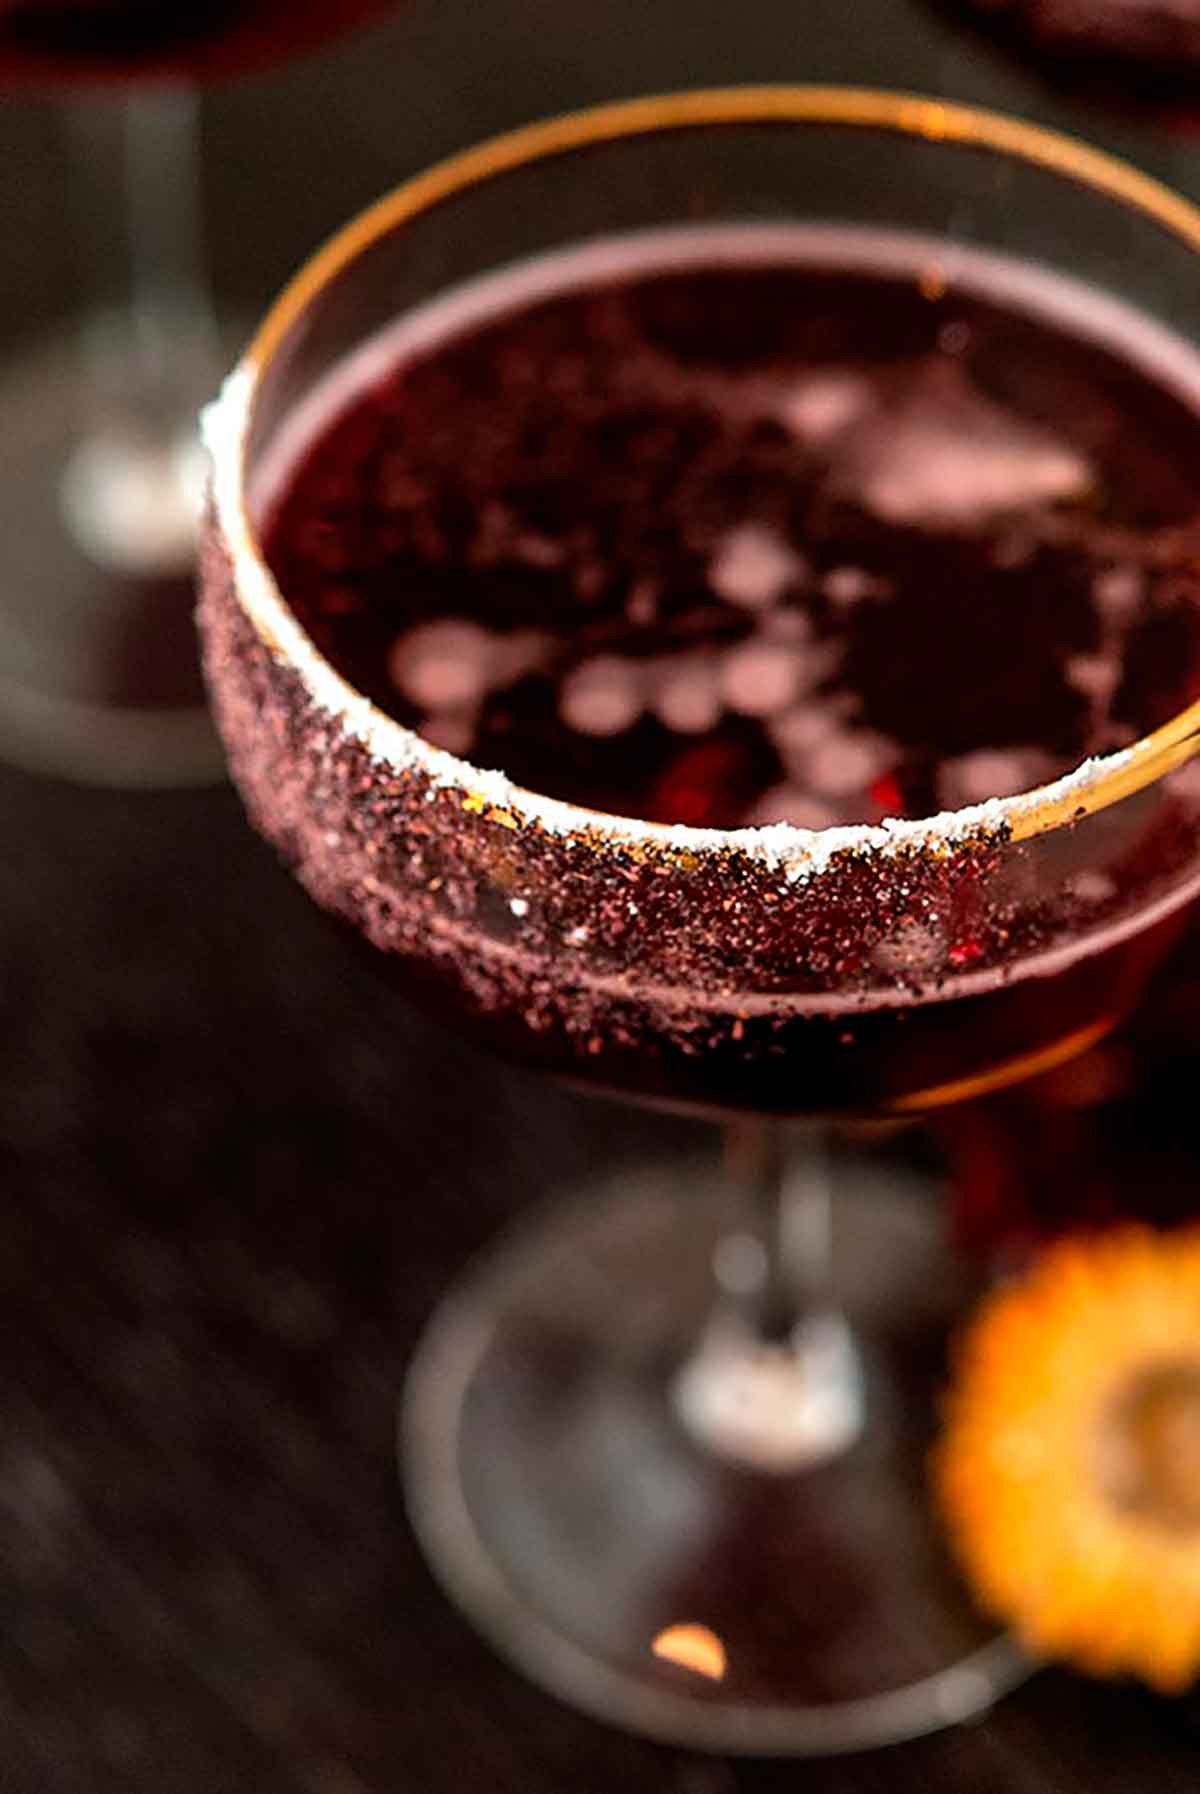 A powdered sugar and hibiscus powder garnish on the side of a cocktail.